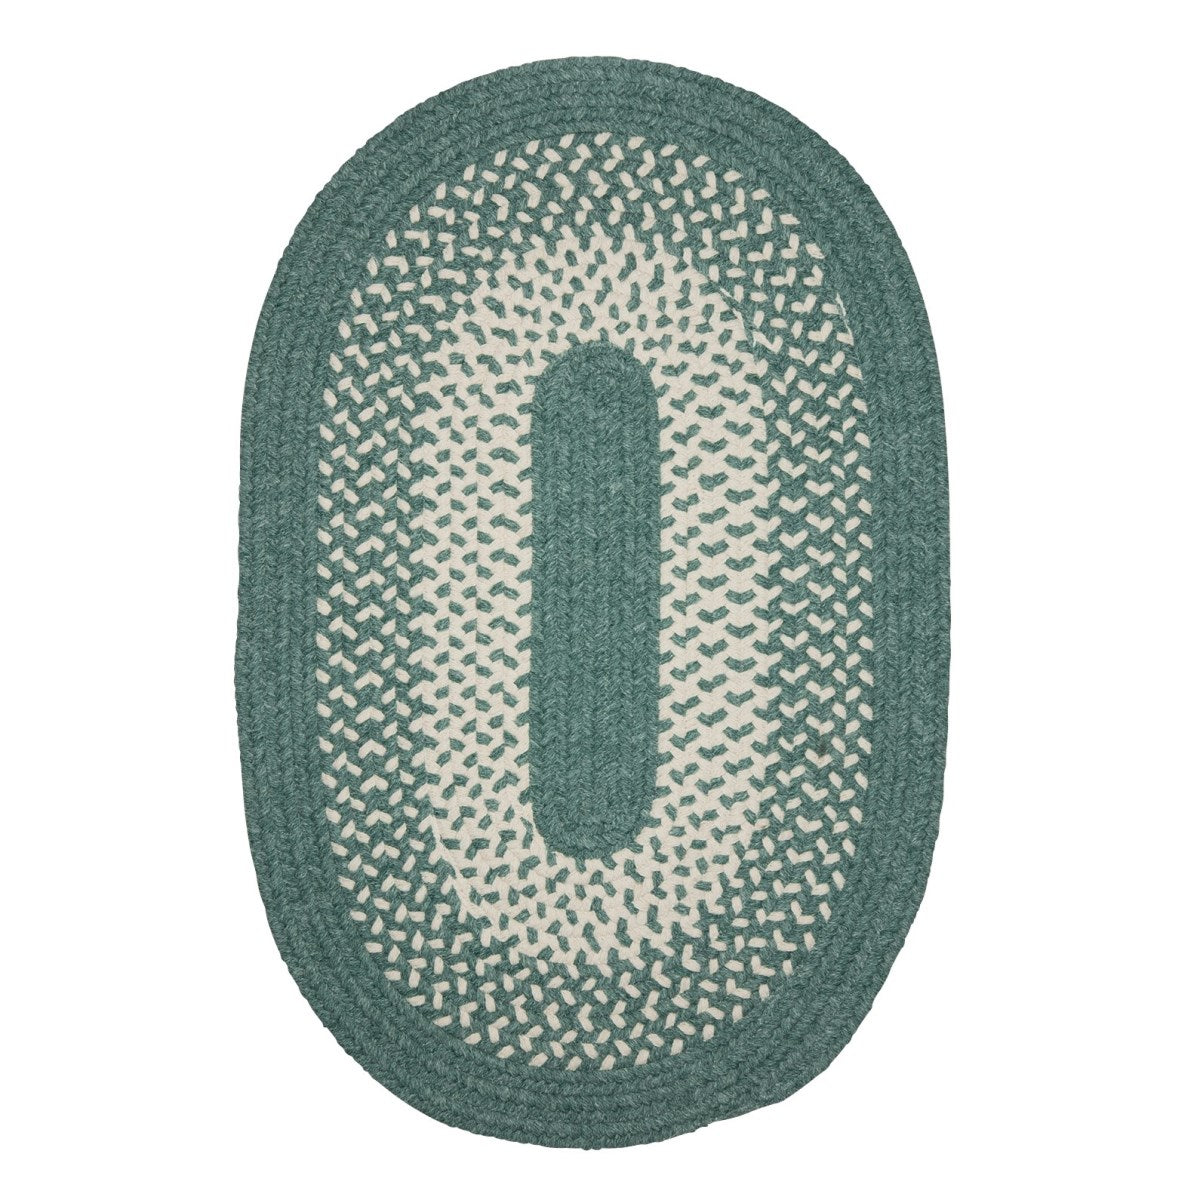 Jackson Teal Outdoor Braided Oval Rugs